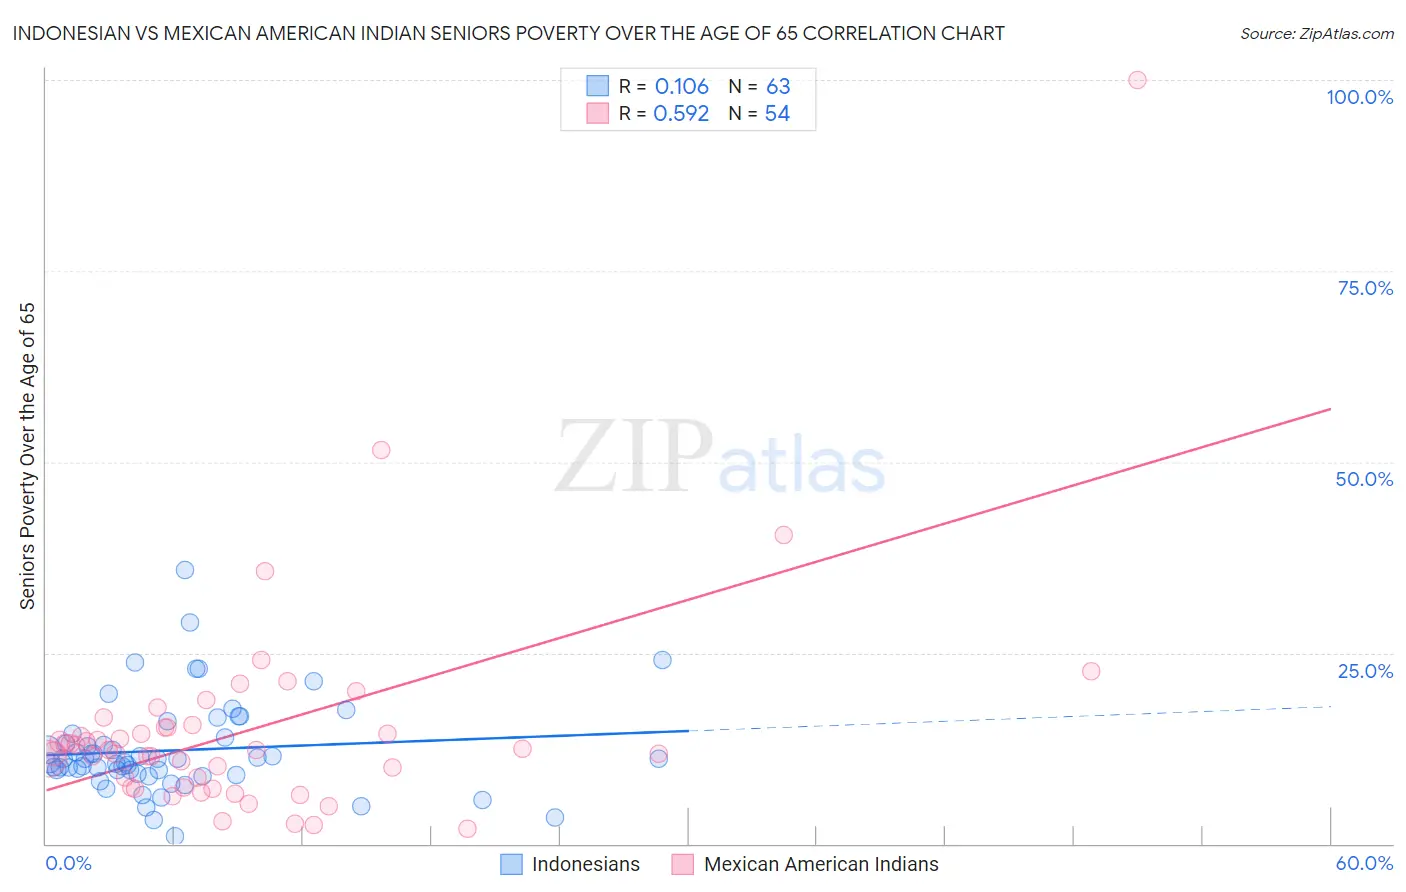 Indonesian vs Mexican American Indian Seniors Poverty Over the Age of 65